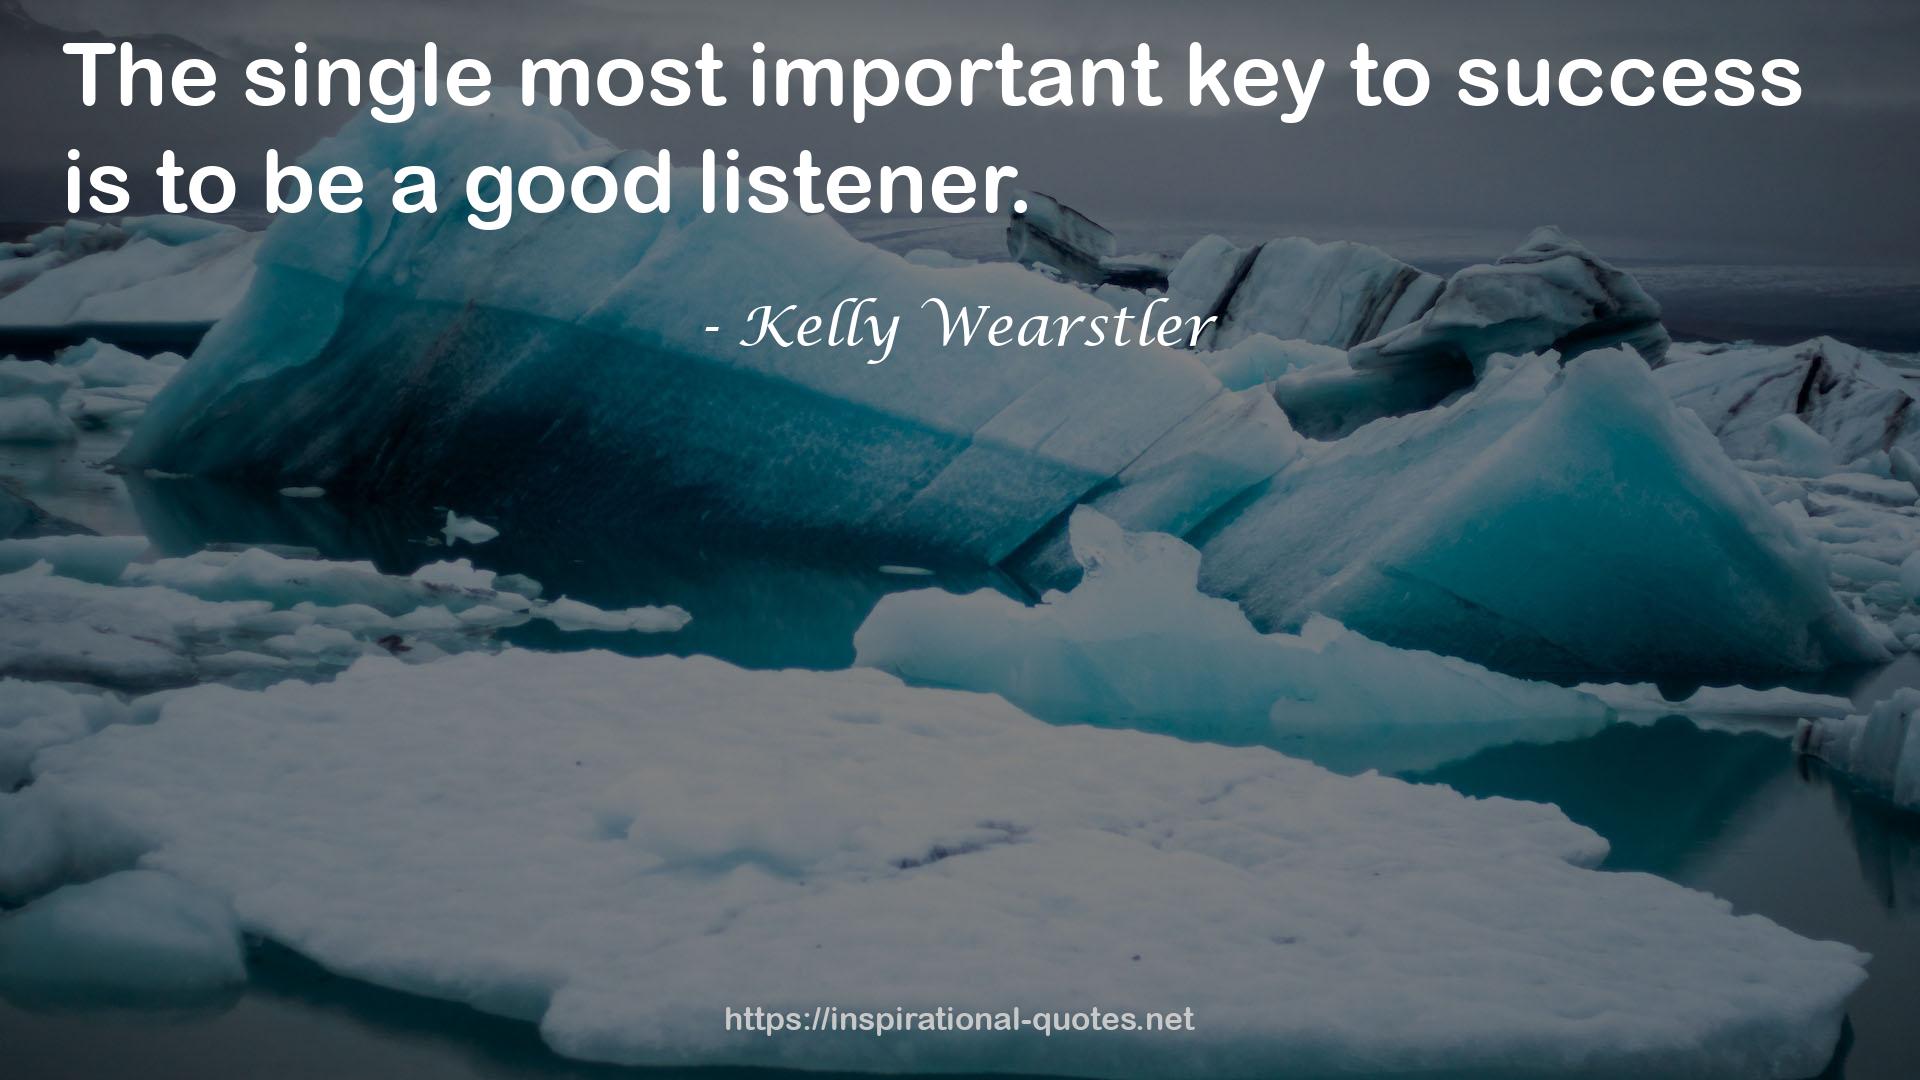 Kelly Wearstler QUOTES